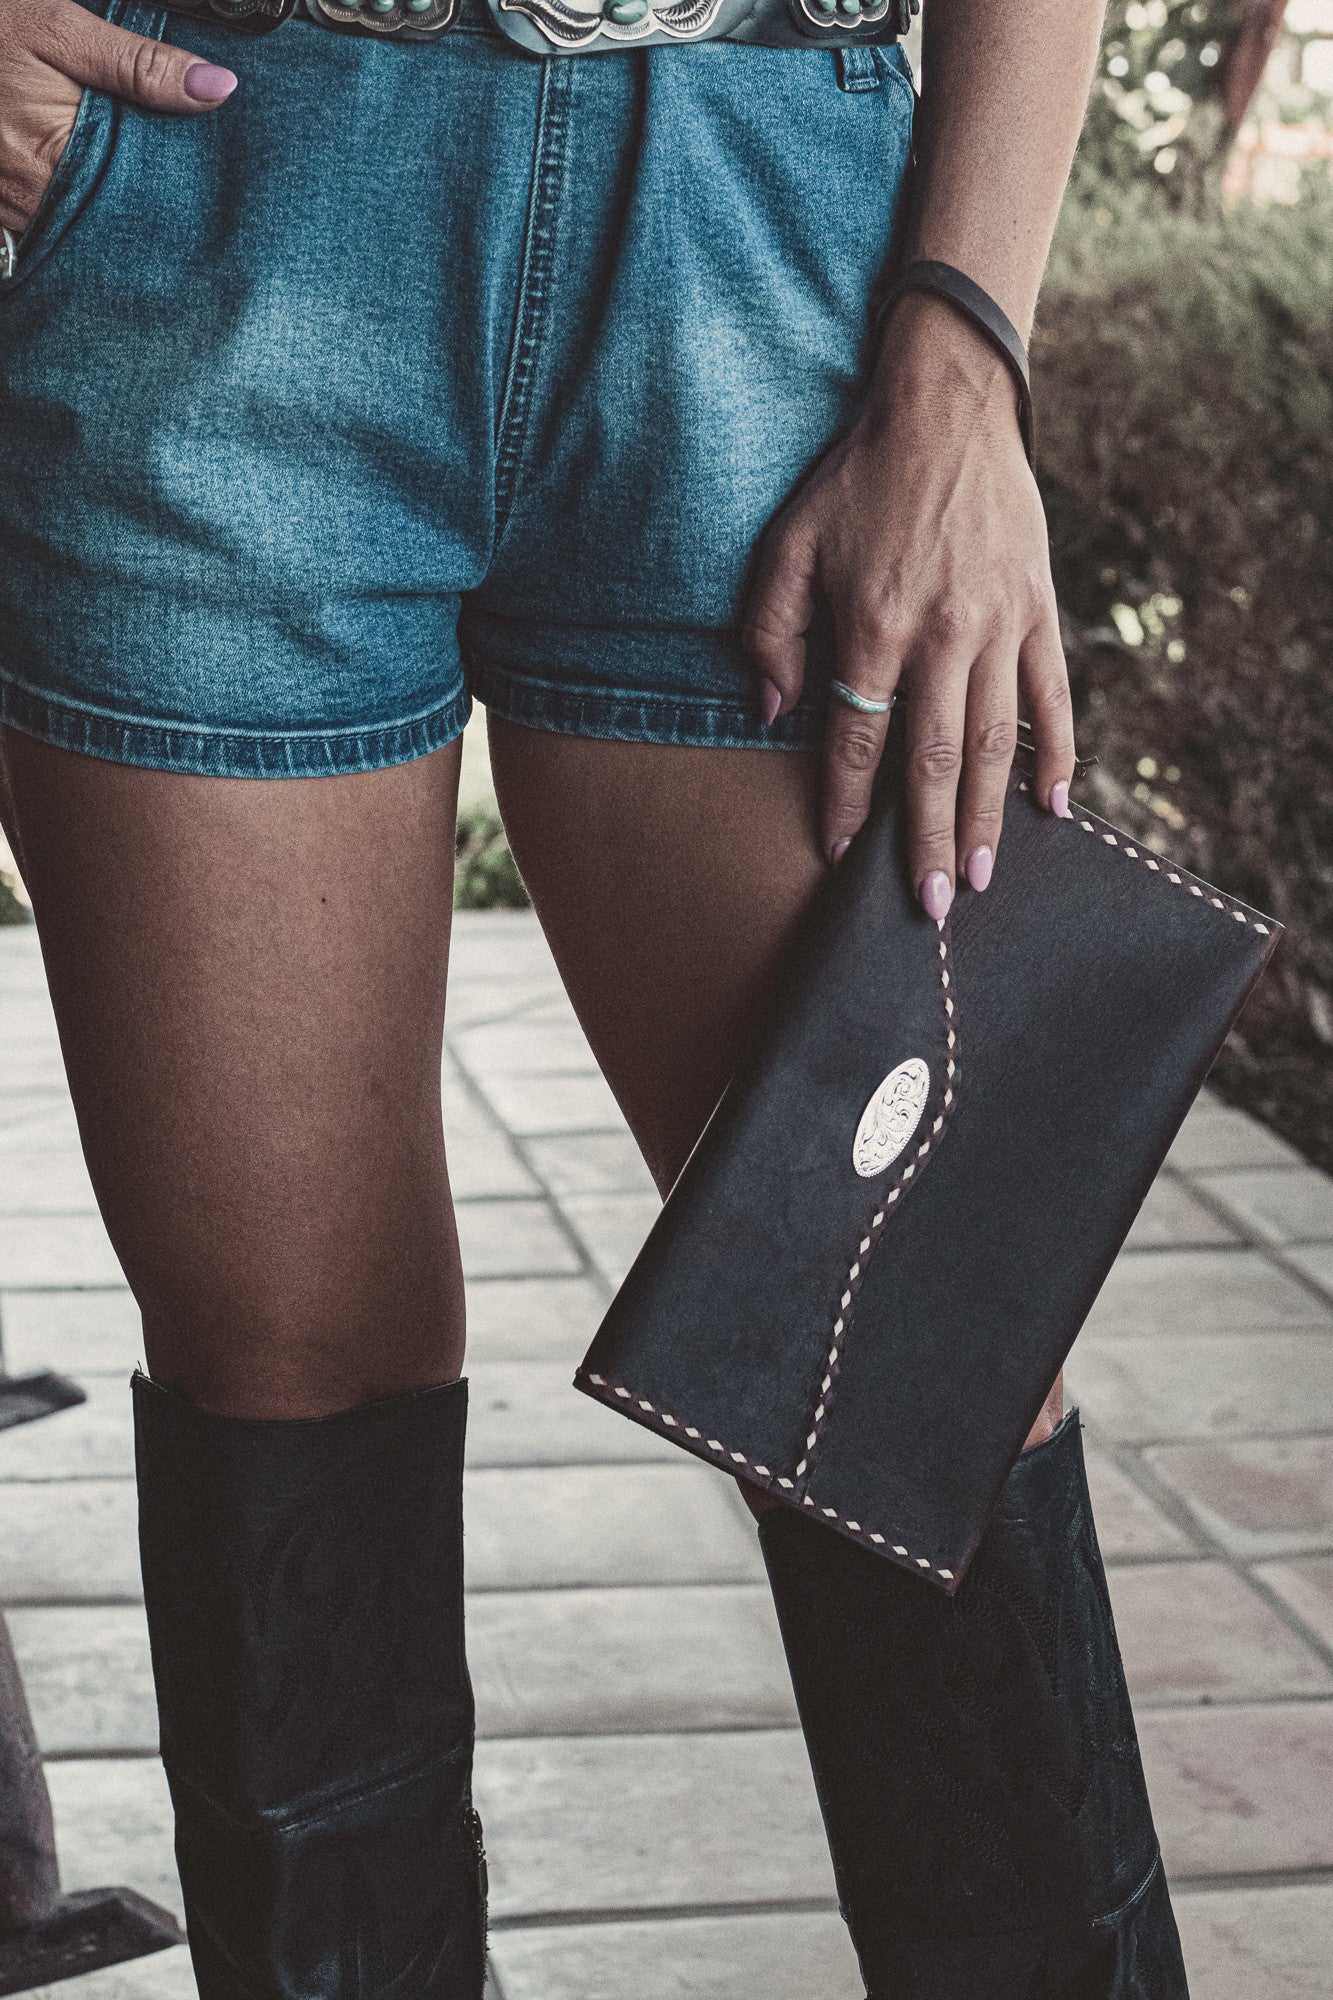 Pre Order Brumby Clutch - You pick the color